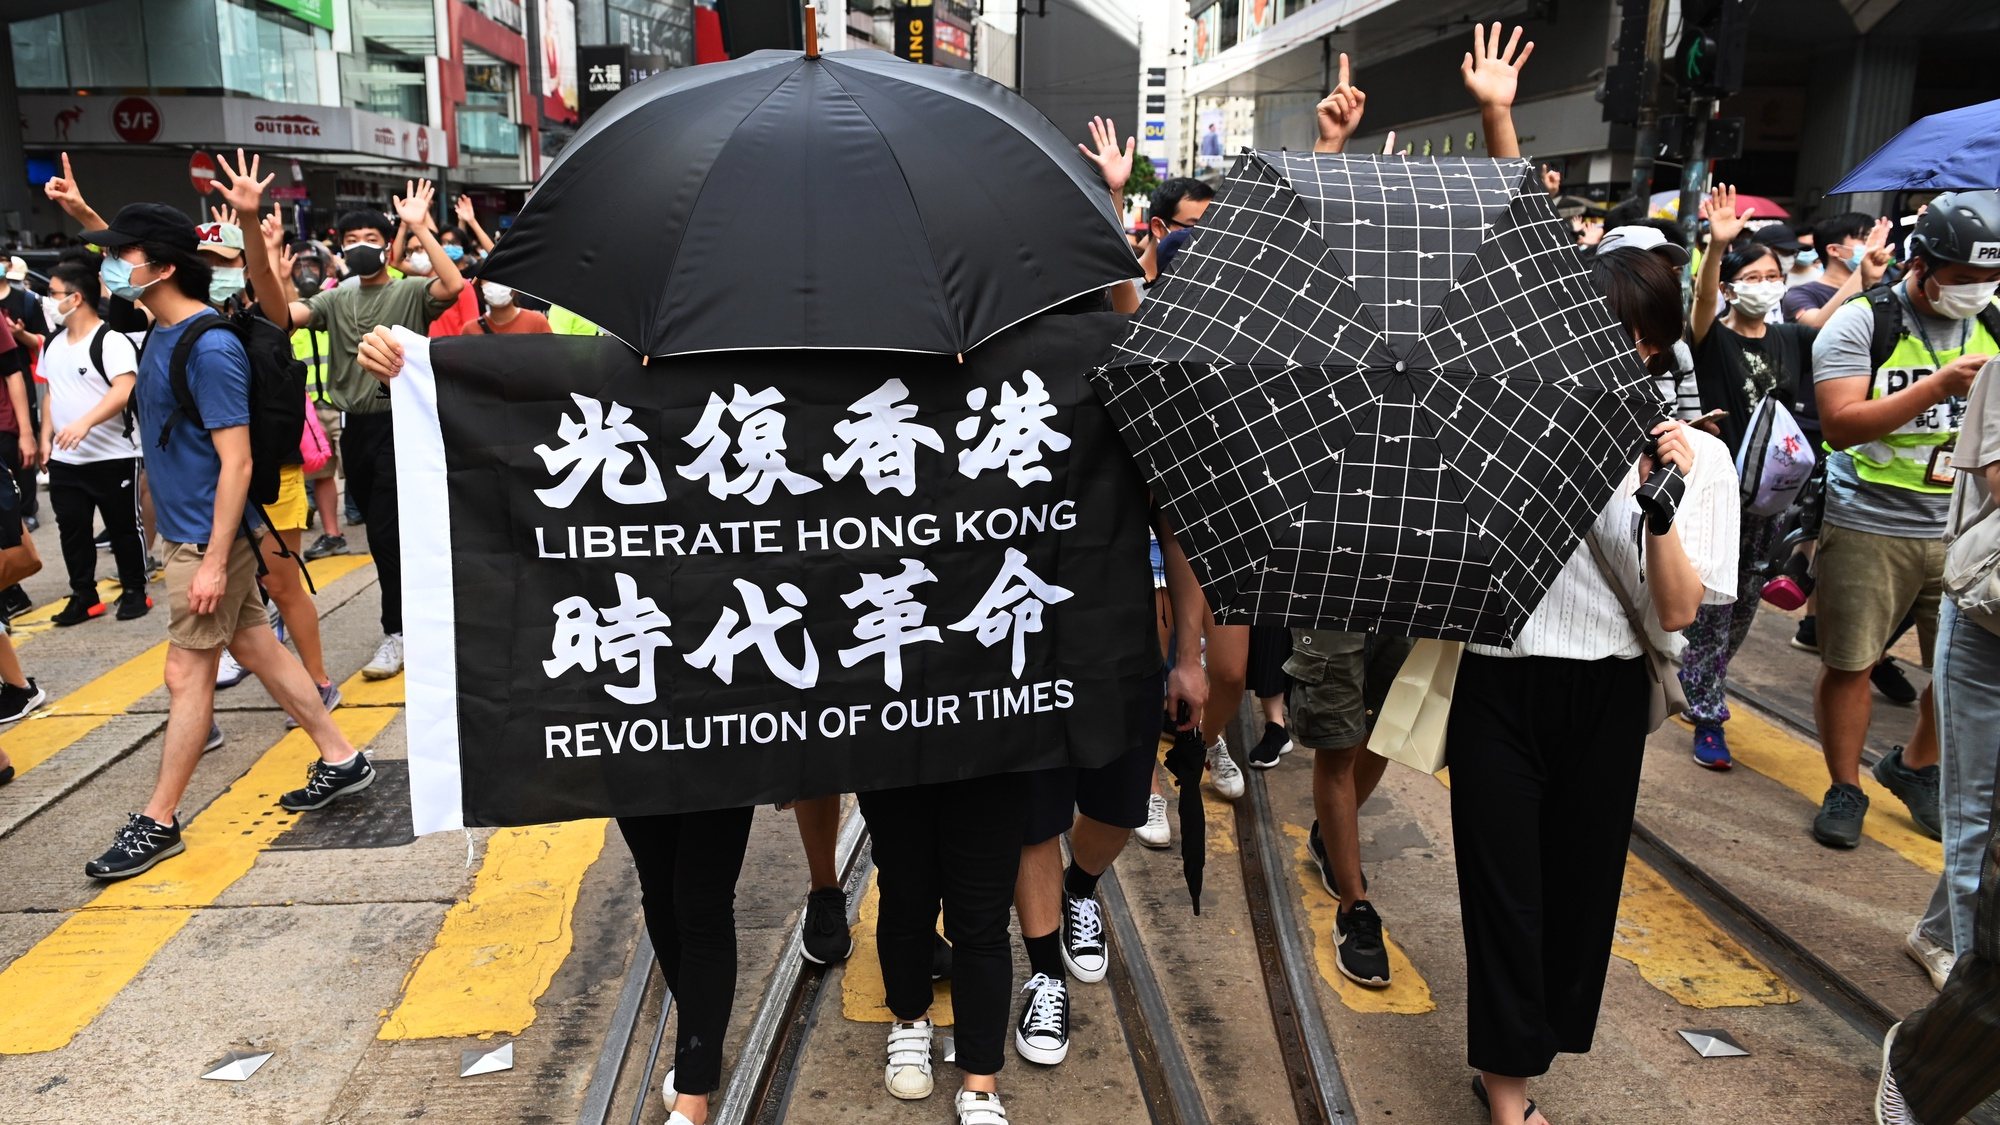 epa08519966 Protesters holding umbrellas and a banner that says &#039;Liberate Hong Kong, revolution of our times&#039; march during a rally against a new national security law on the 23rd anniversary of the establishment of the Hong Kong Special Administrative Region in Hong Kong, China, 01 July 2020. Chinese President Xi Jinping has signed into law the national security legislation Beijing has tailor-made for Hong Kong, prohibiting acts of secession, subversion, terrorism and collusion with foreign forces to endanger national security.  EPA/MIGUEL CANDELA